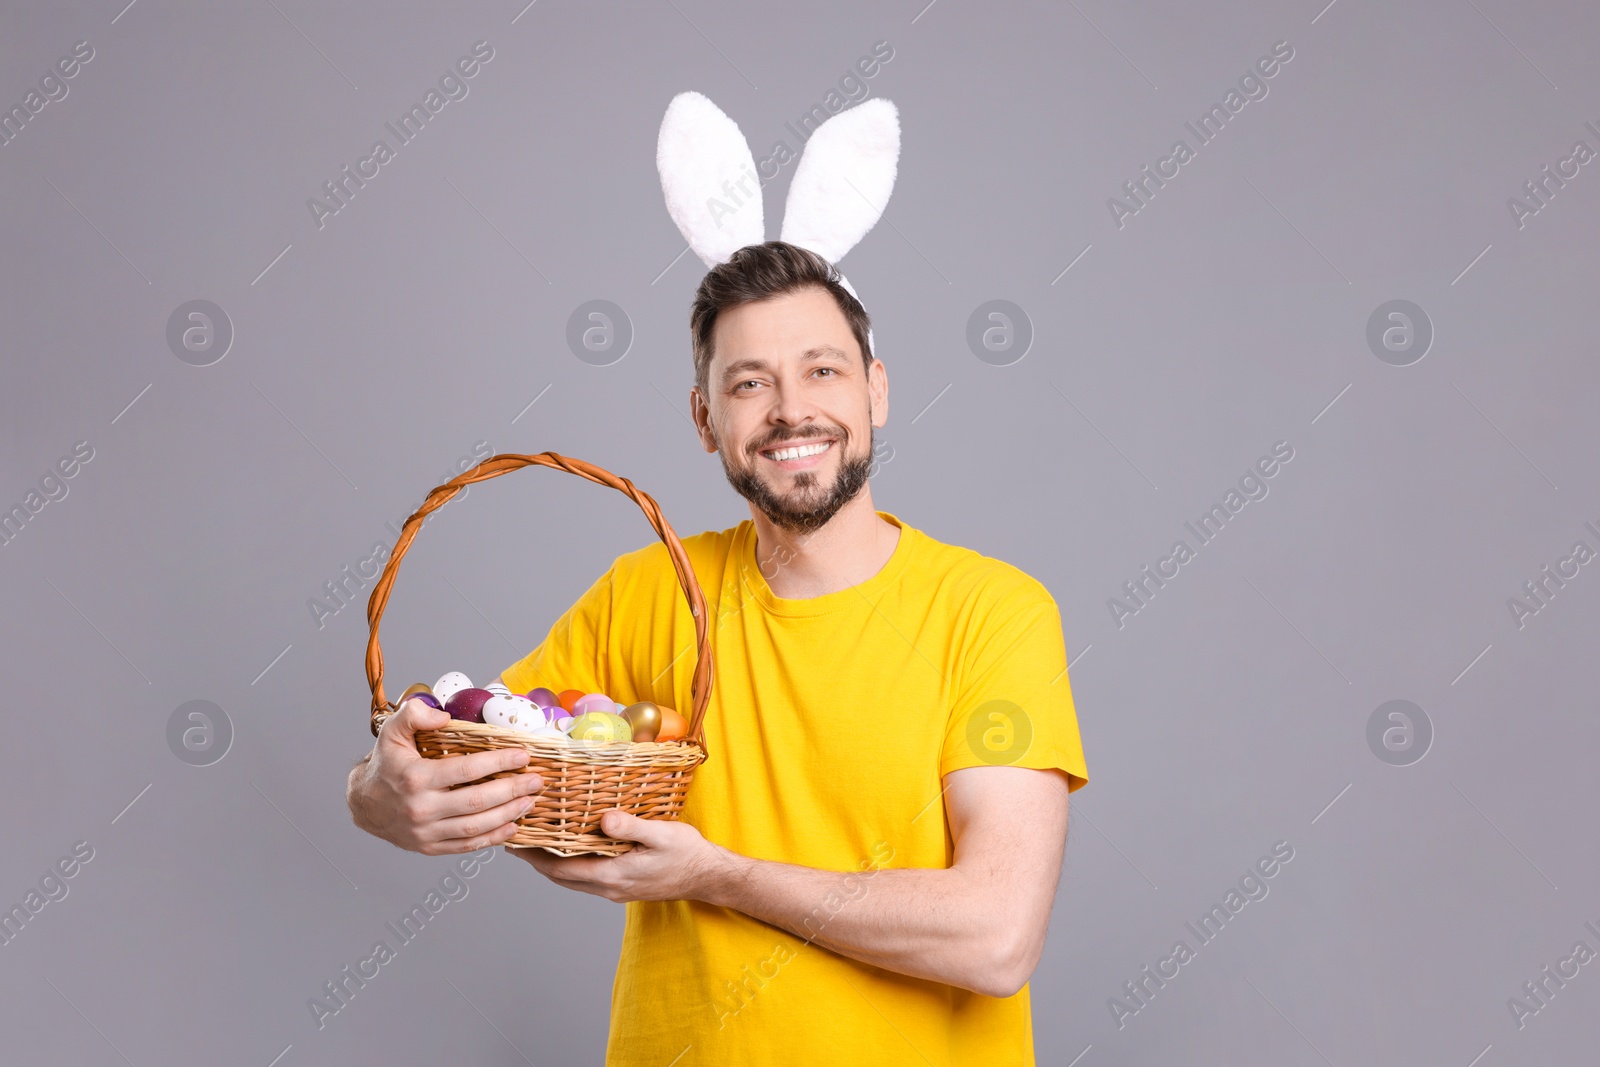 Photo of Happy man in bunny ears headband holding wicker basket with painted Easter eggs on grey background